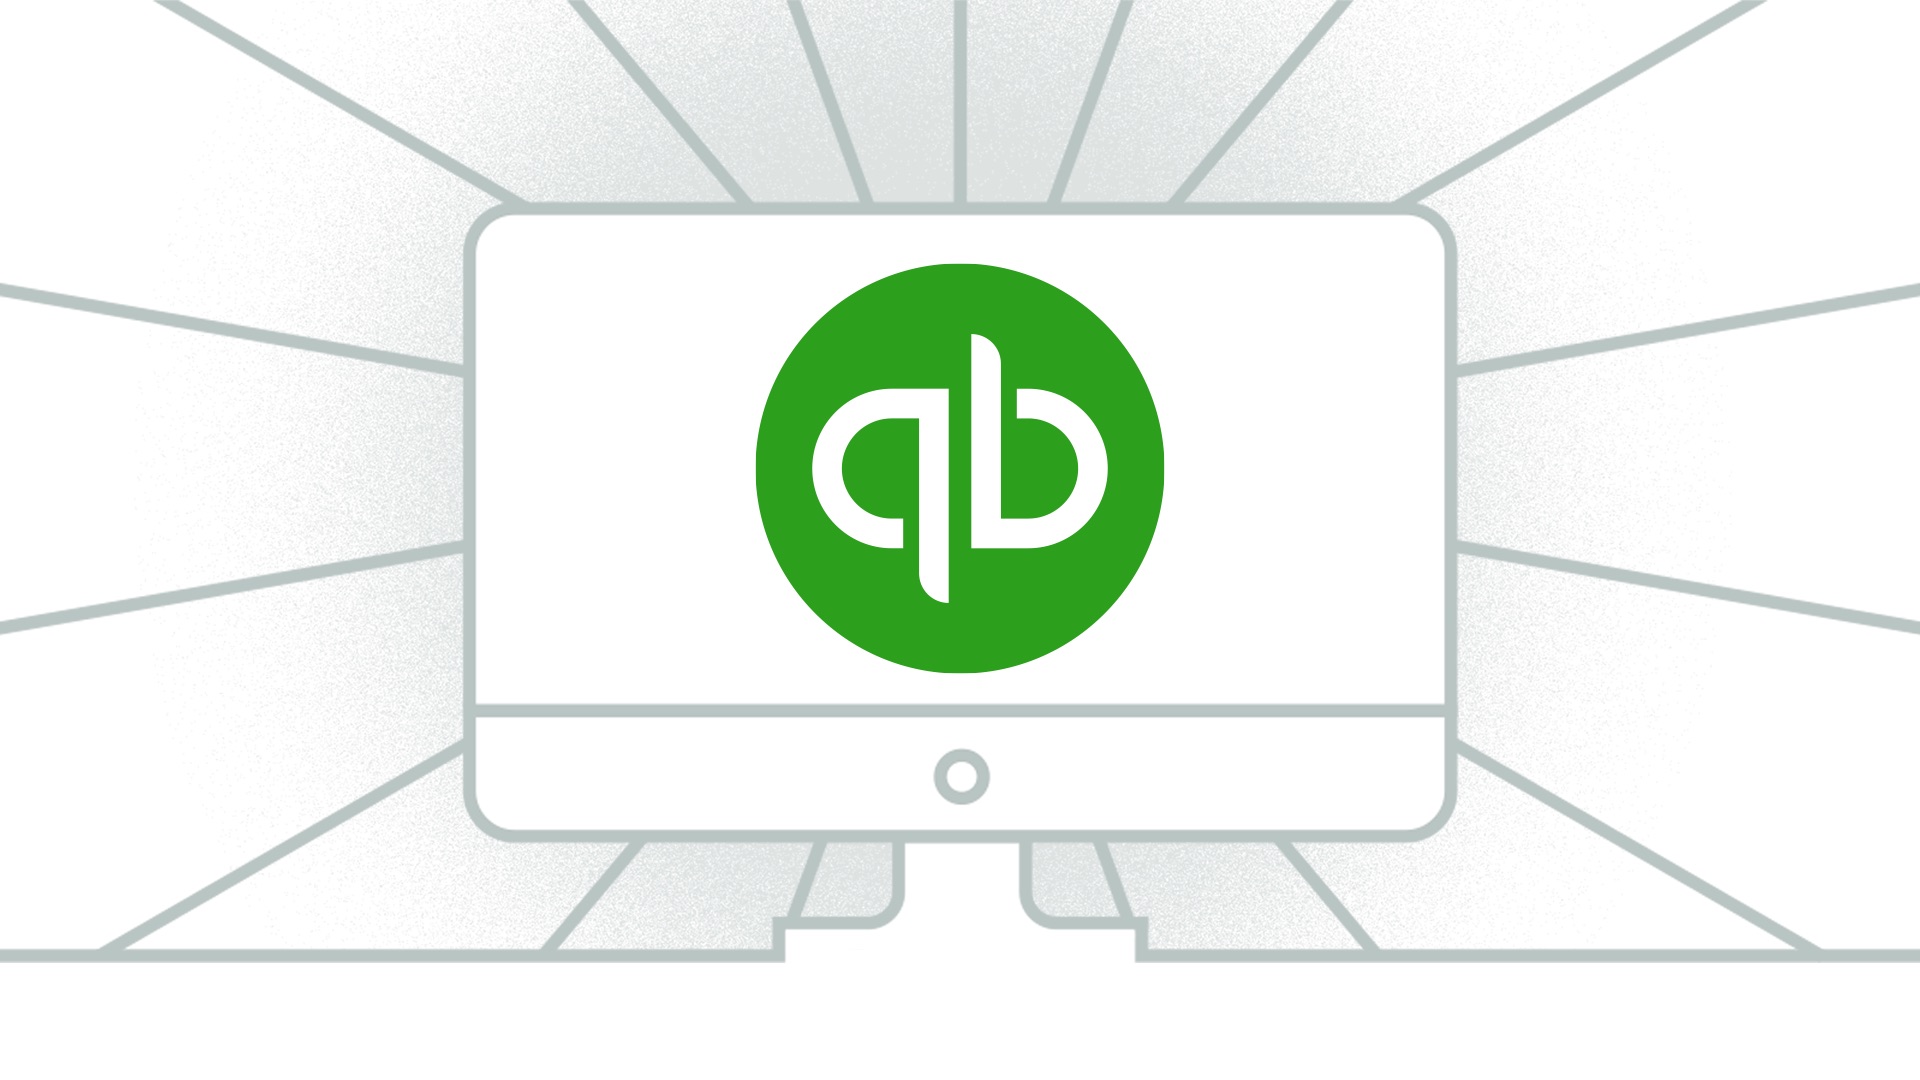 renaming rules in quickbooks for mac